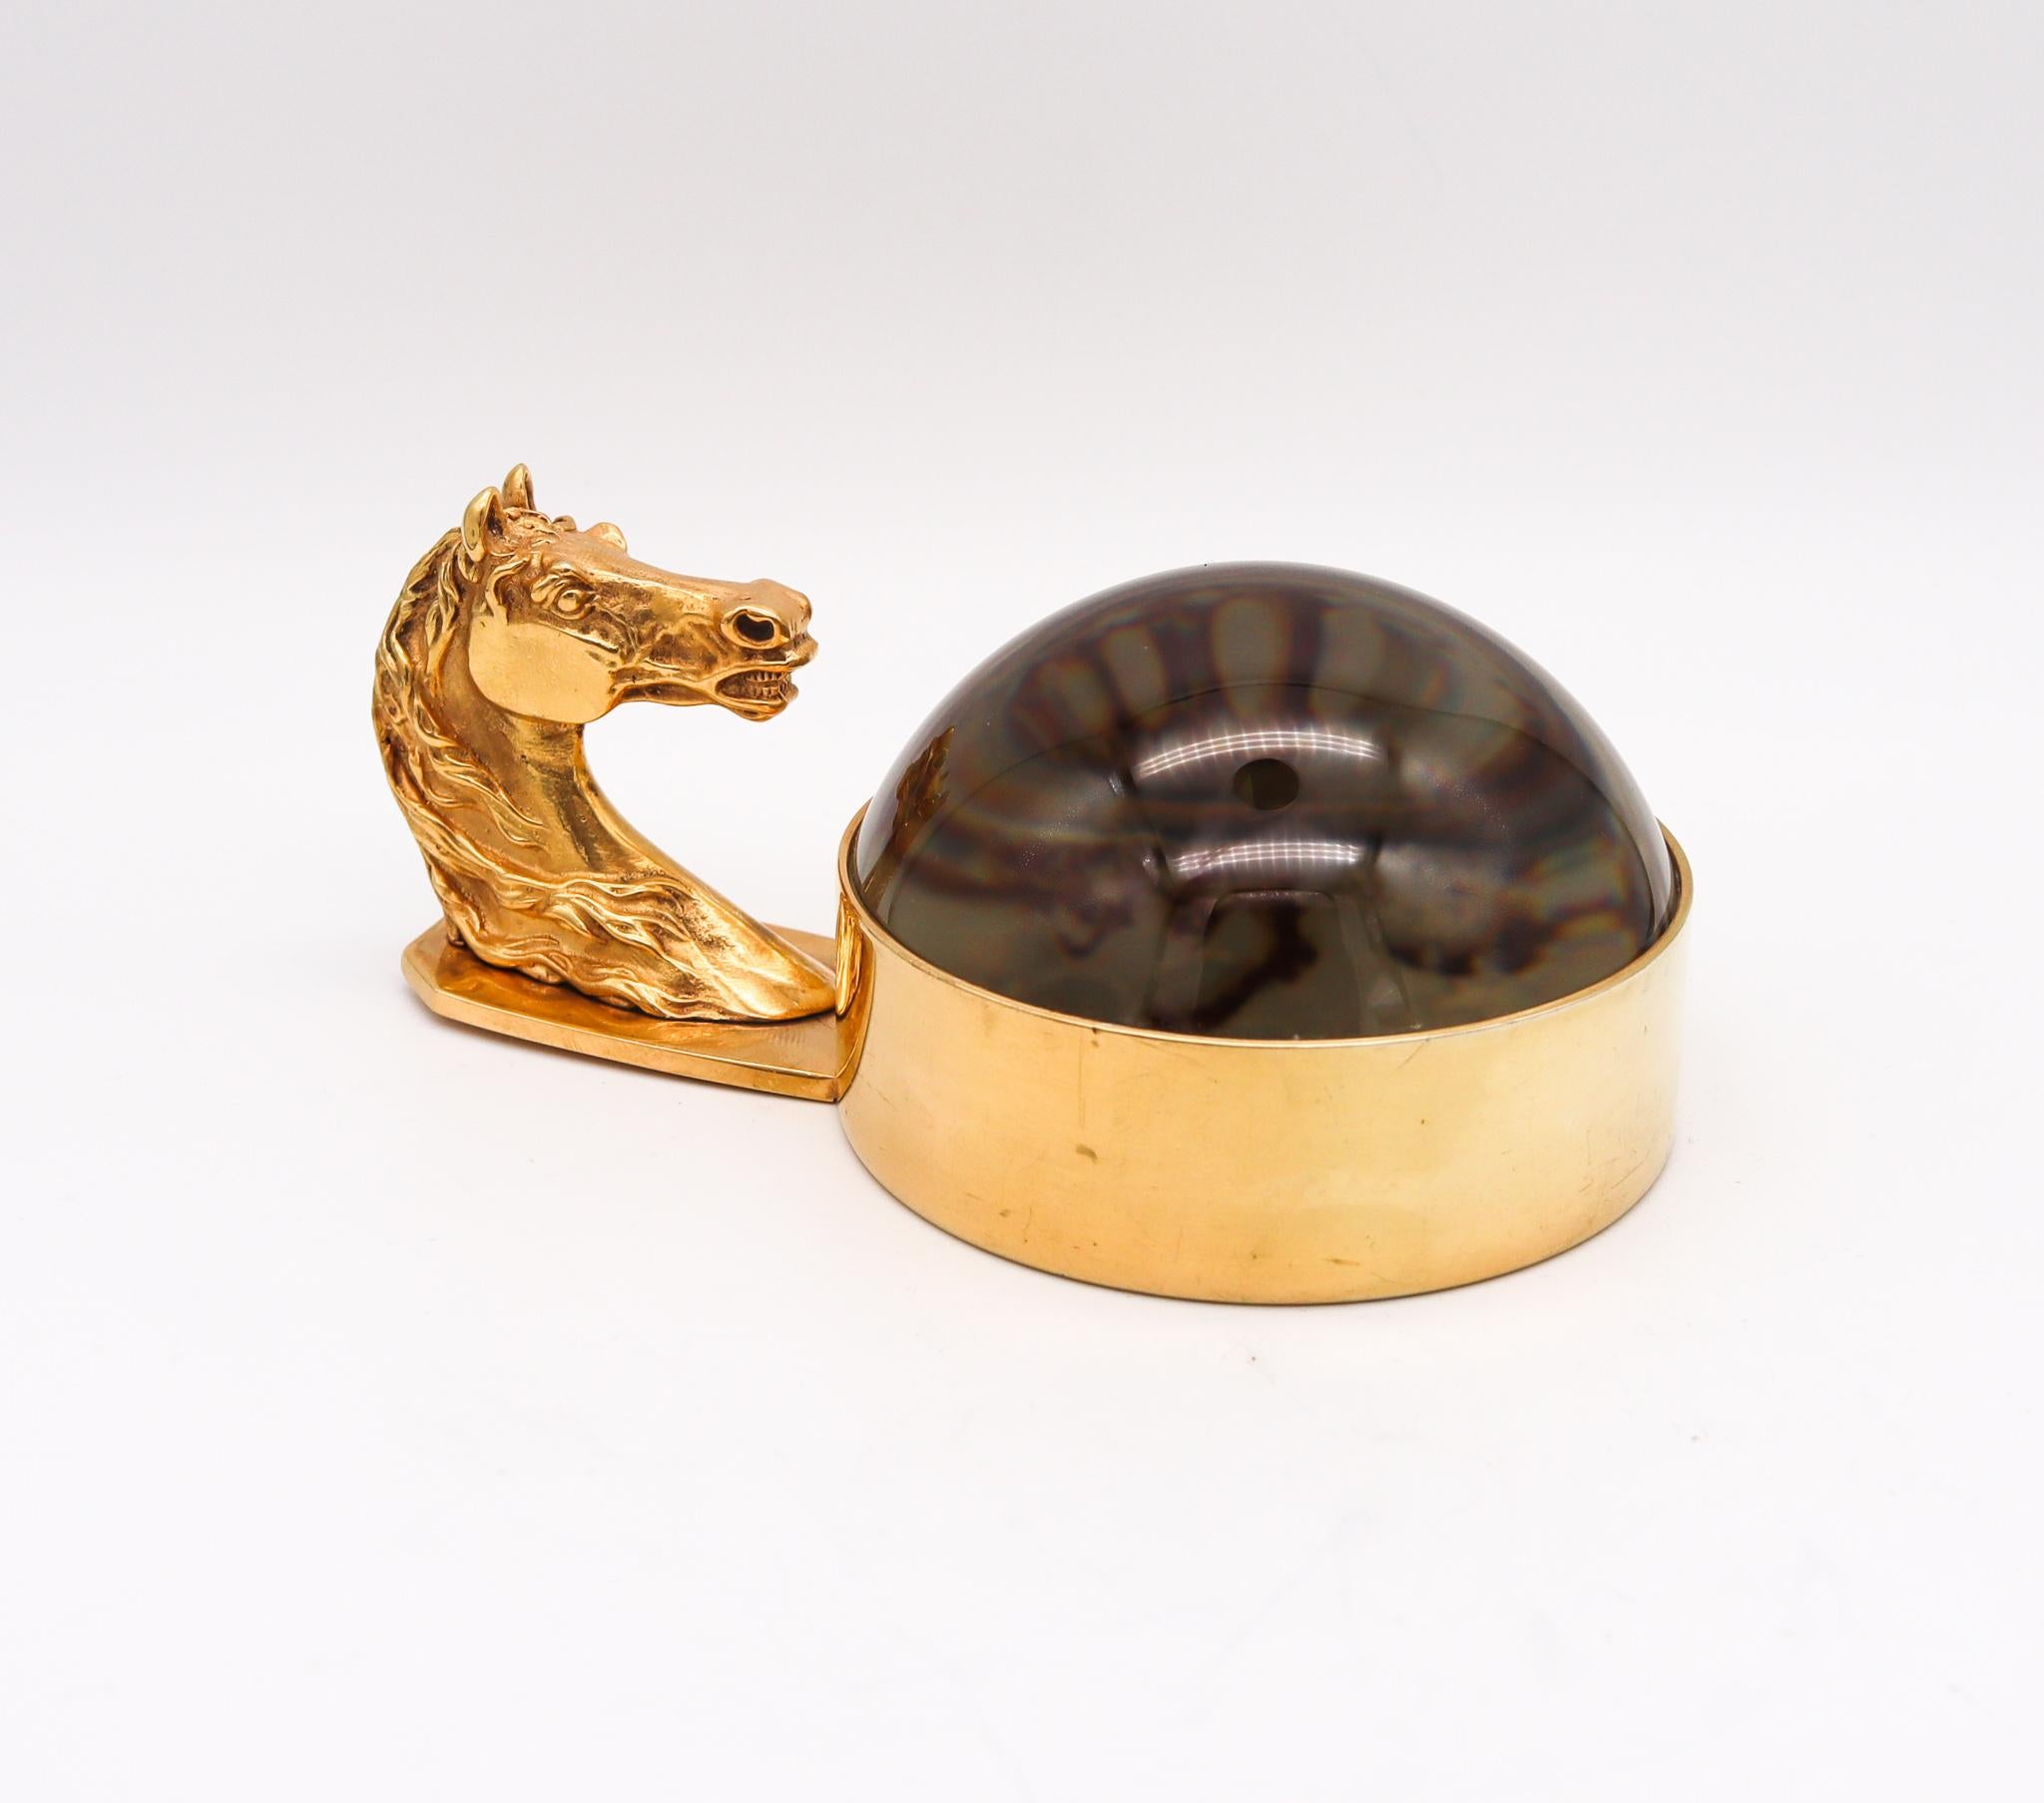 Desk magnifier glass designed by Hermes.

Fabulous and highly decorative piece, created in Paris, France by the house of Hermes, back in the 1960. This useful horse-profile paper weight and magnifier glass is rare and has been carefully crafted in